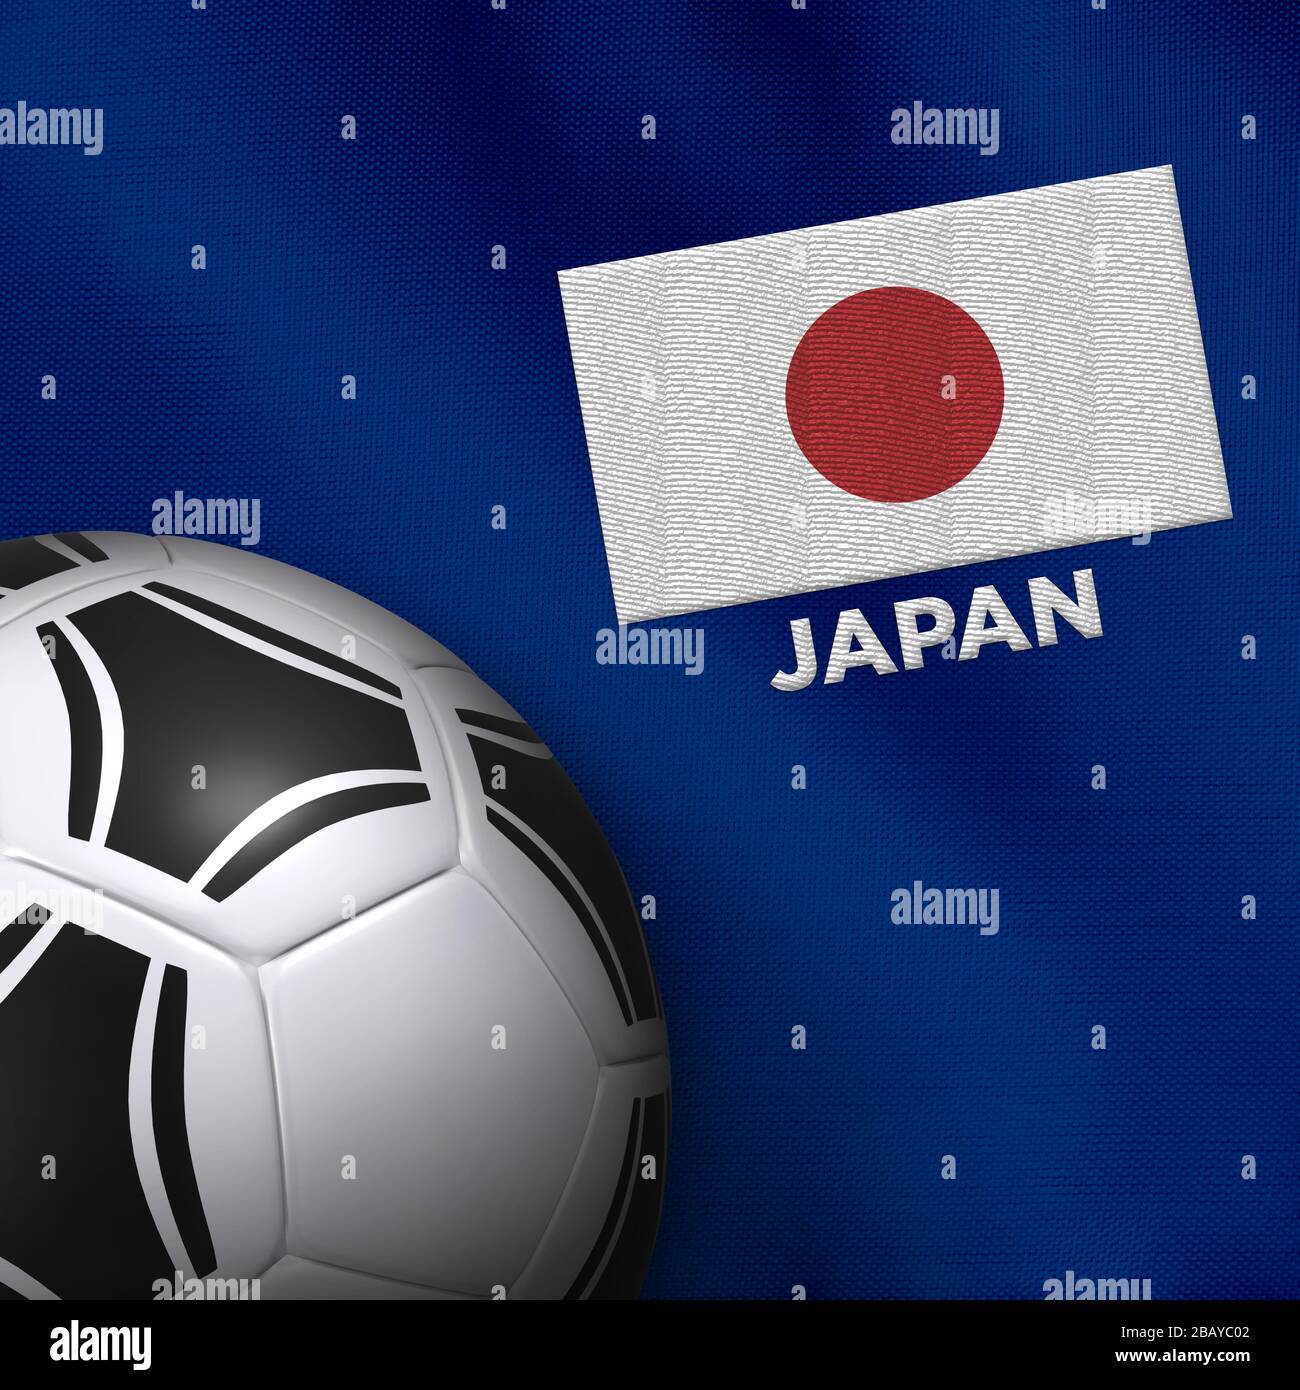 Football (soccer) ball and national team jersey of Japan. Stock Photo